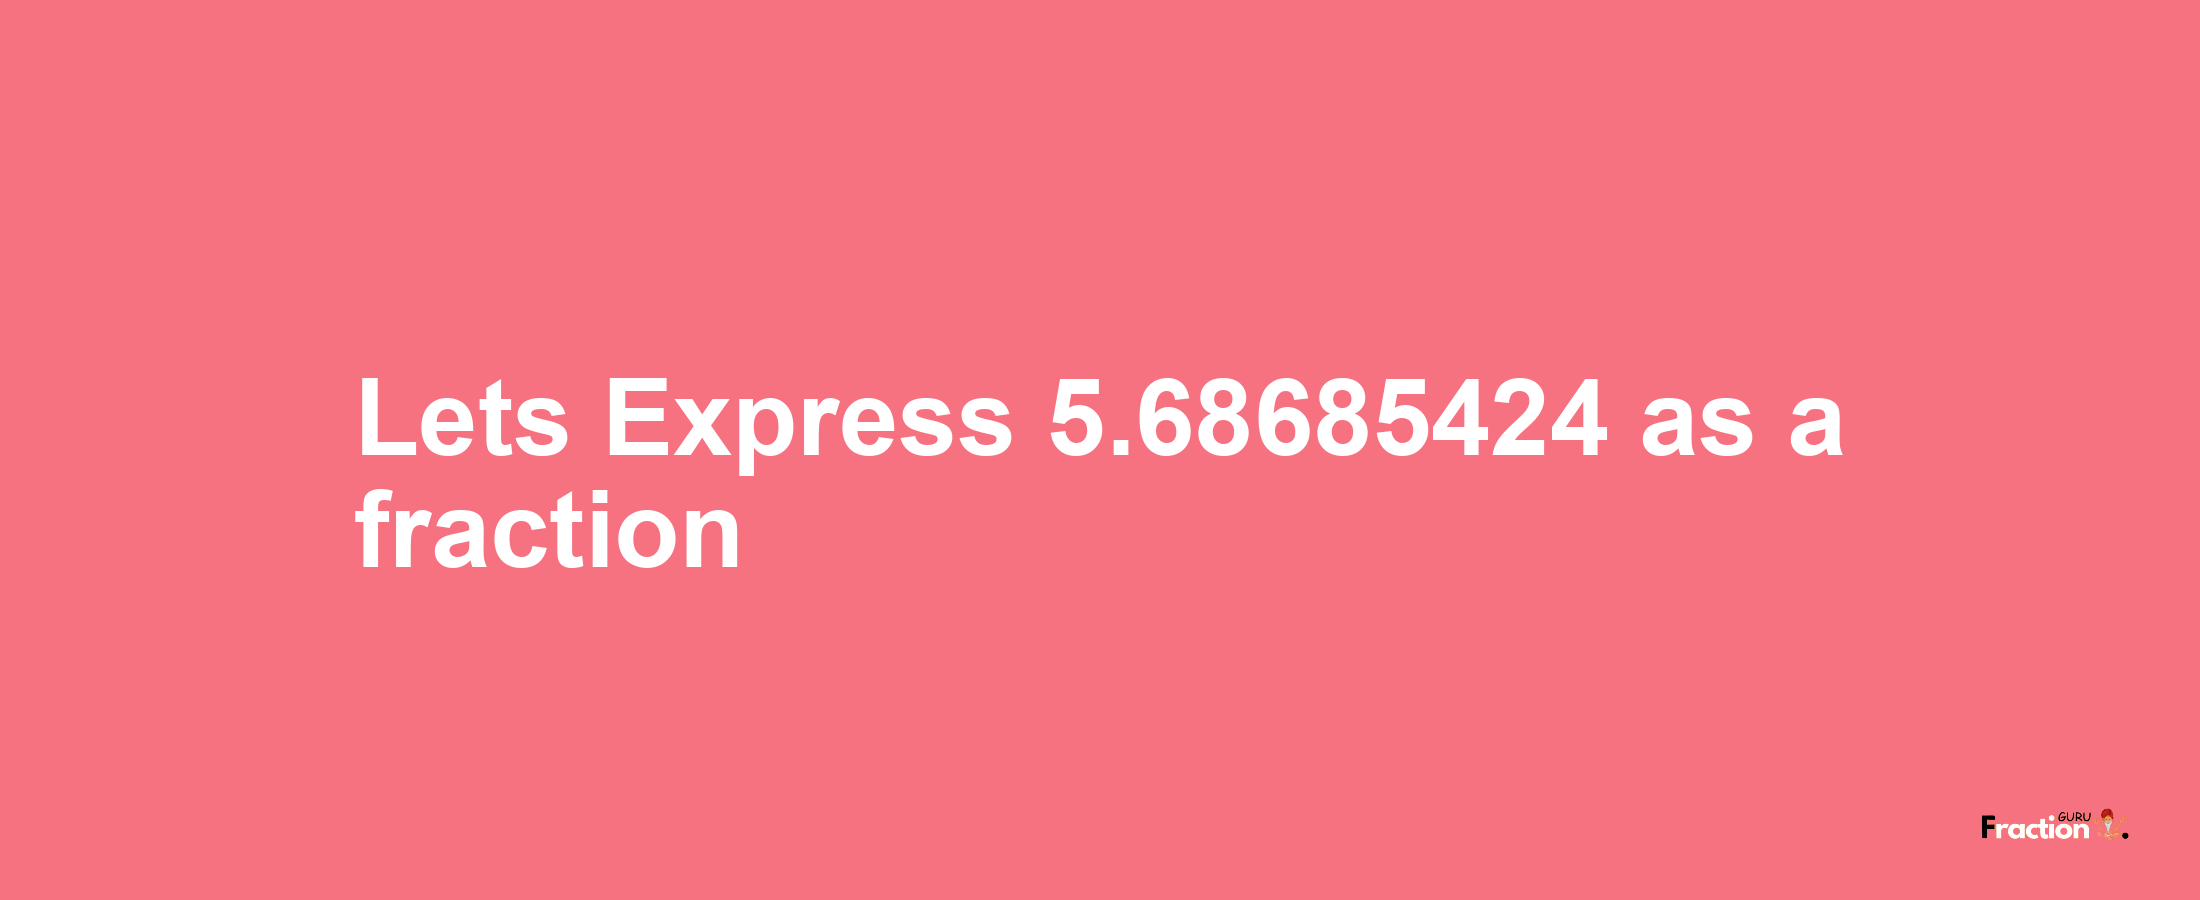 Lets Express 5.68685424 as afraction